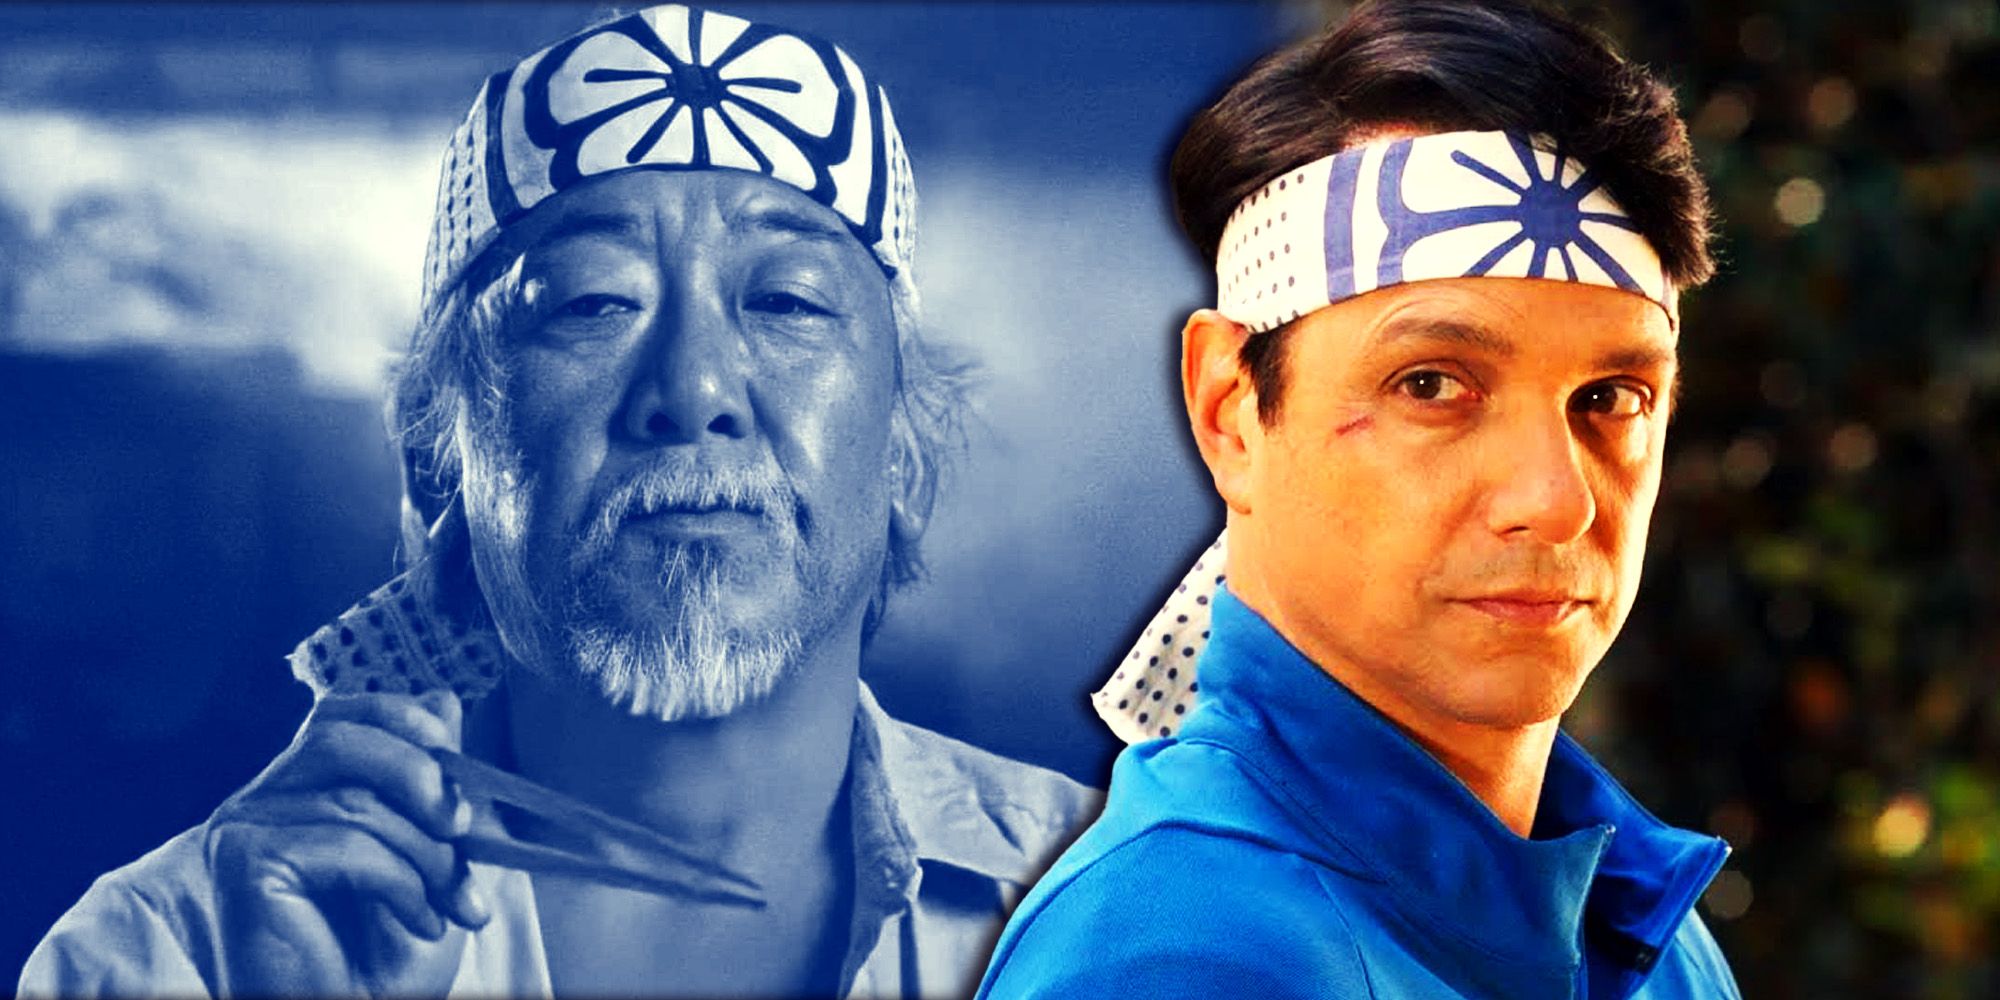 Mr. Miyagi and Daniel LaRusso in Karate Kid and Cobra KAi respectively